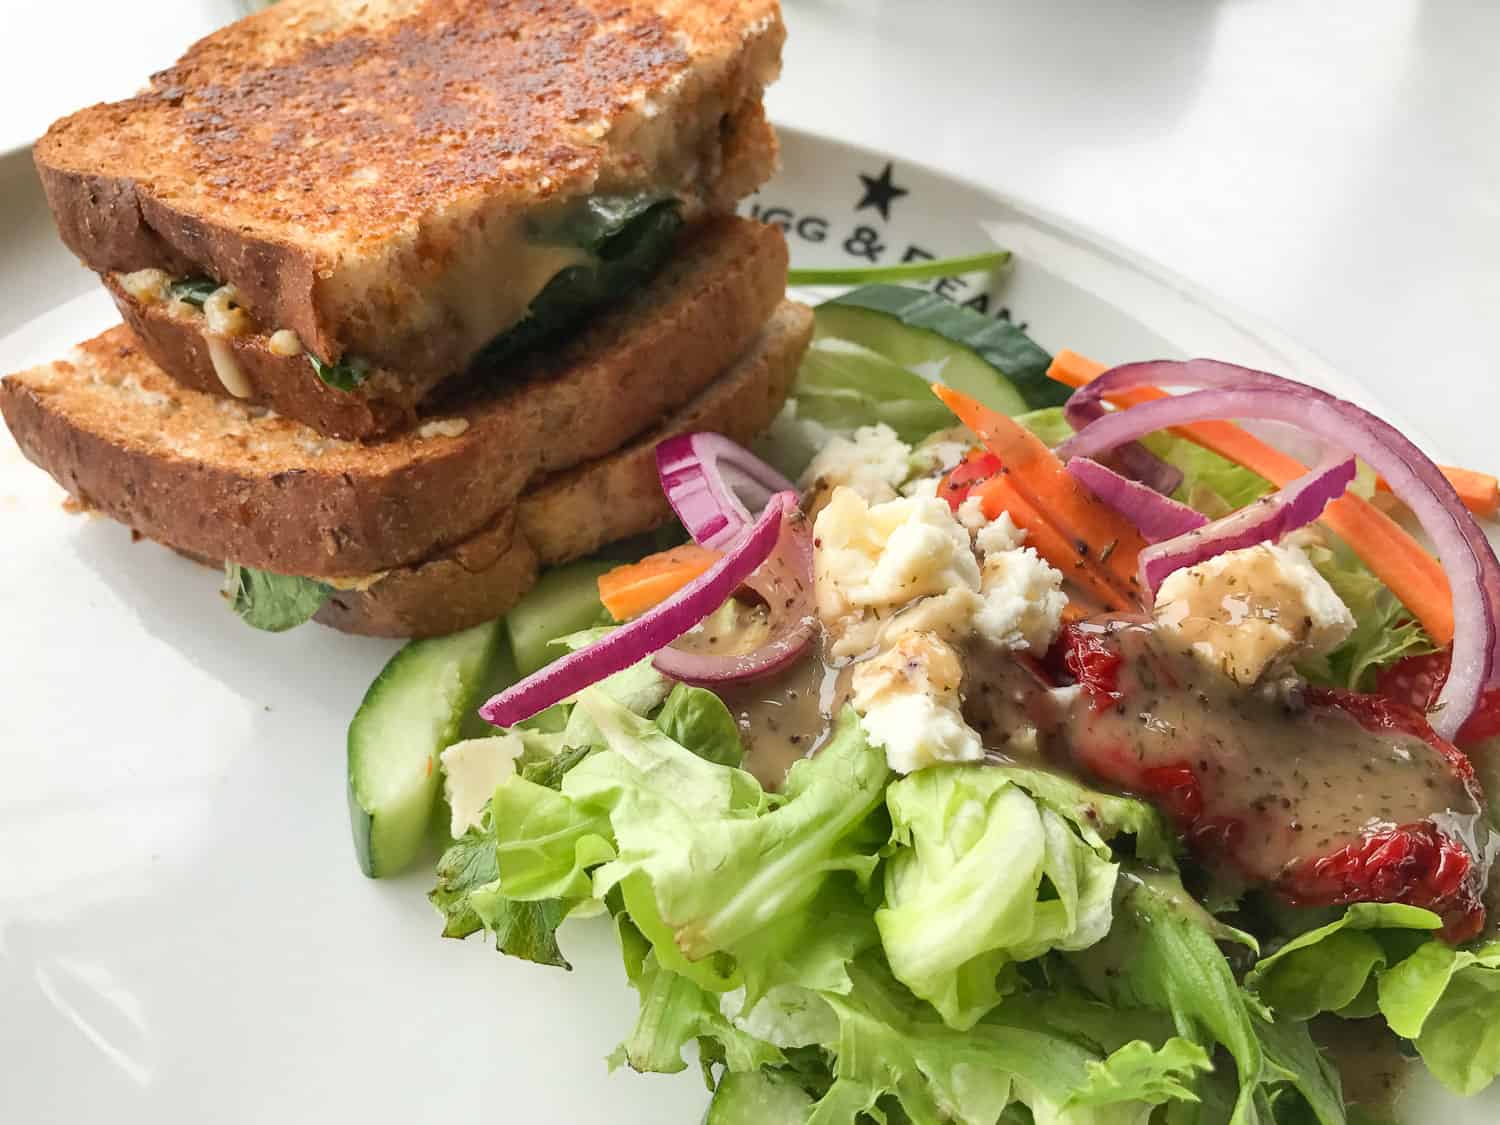 Kruger self-drive guide- Toasted sandwich and salad at Mugg & Bean restaurant